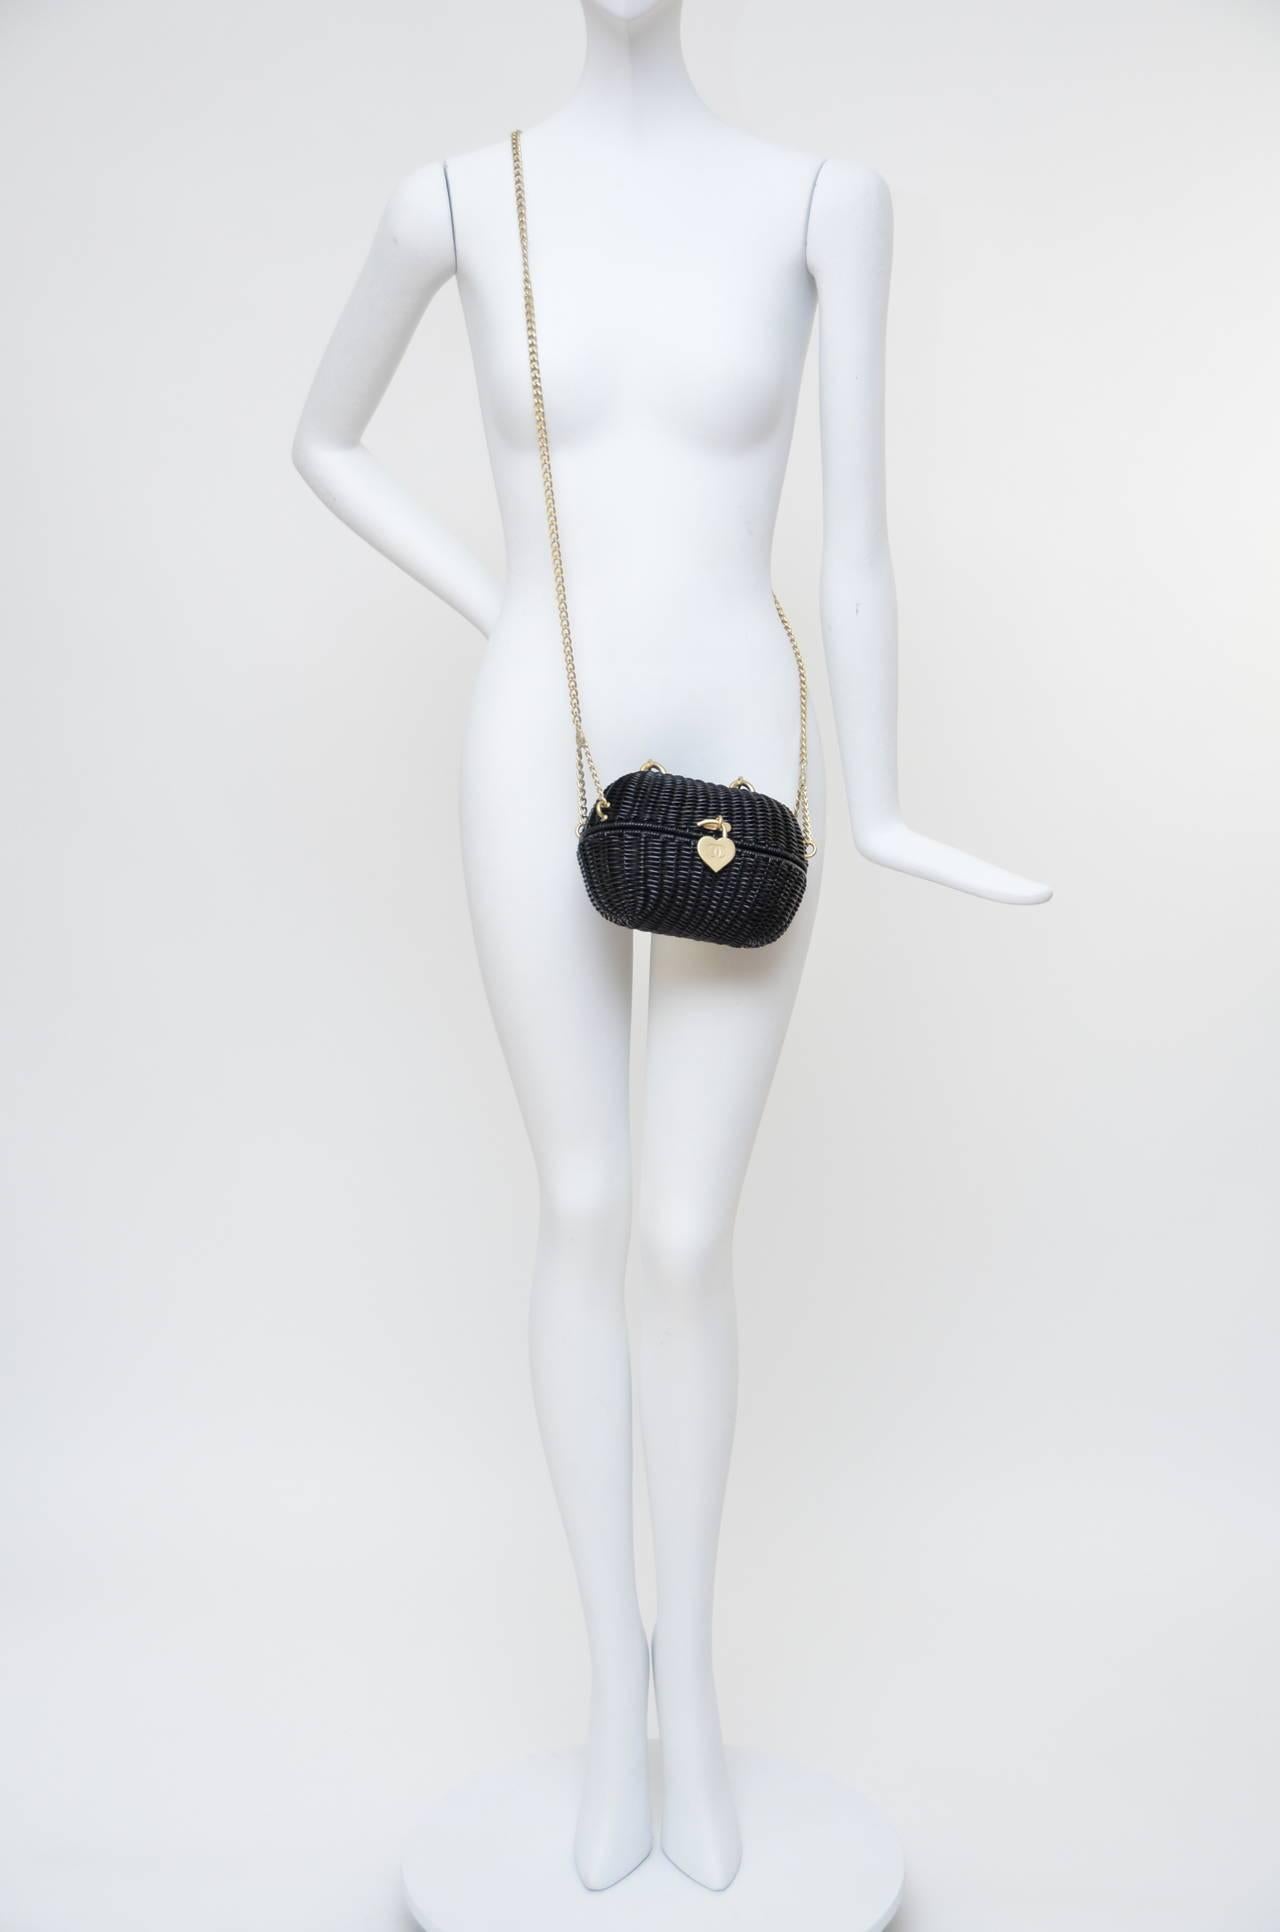 Excellent like new Chanel black mini straw handbag.
This Highly Collectible Authentic Chanel Sweetheart  black handbag was designed in 2005.it is called the Divers Sac. It is a straw woven wicker basket with a heart shaped closure. All the hardware